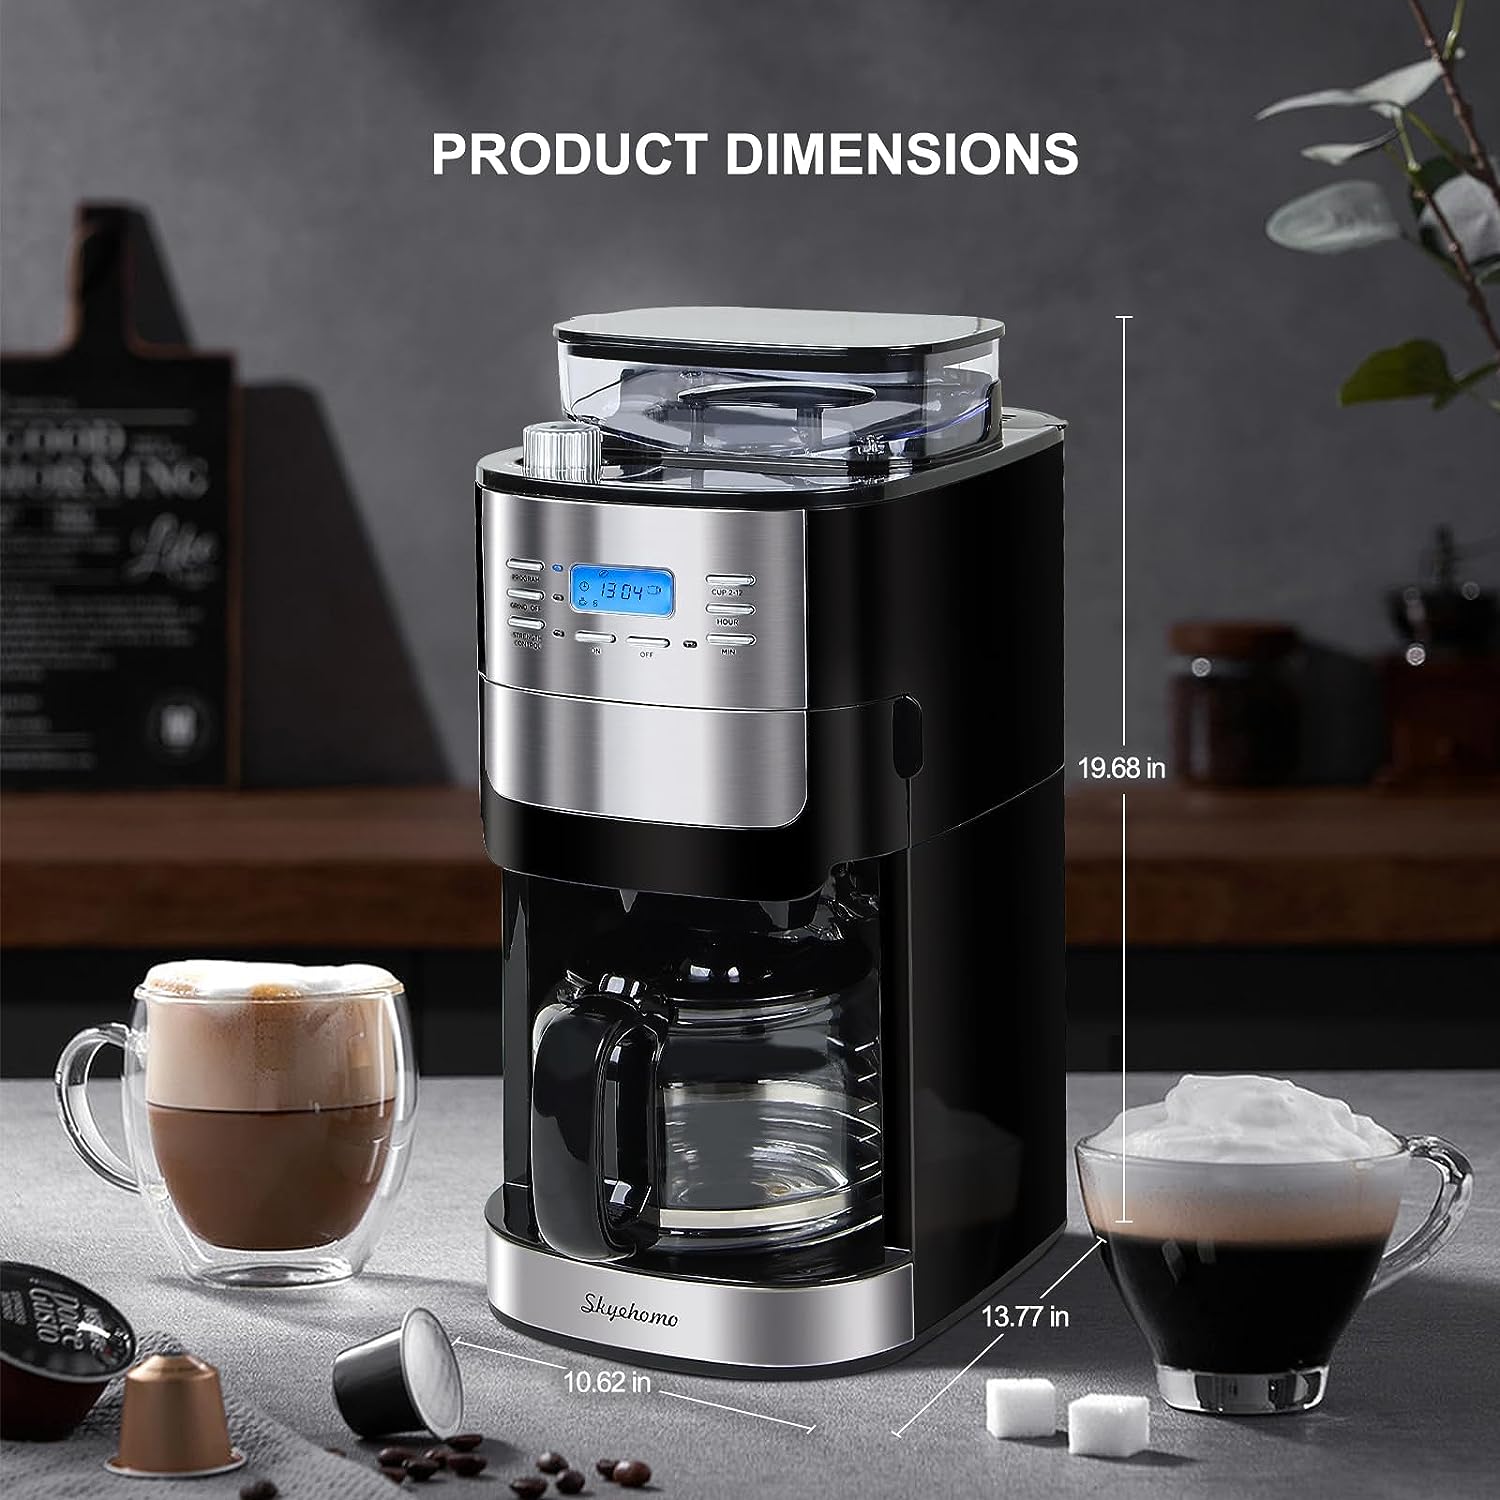 Skyehomo 12 Cup Coffee Maker Review